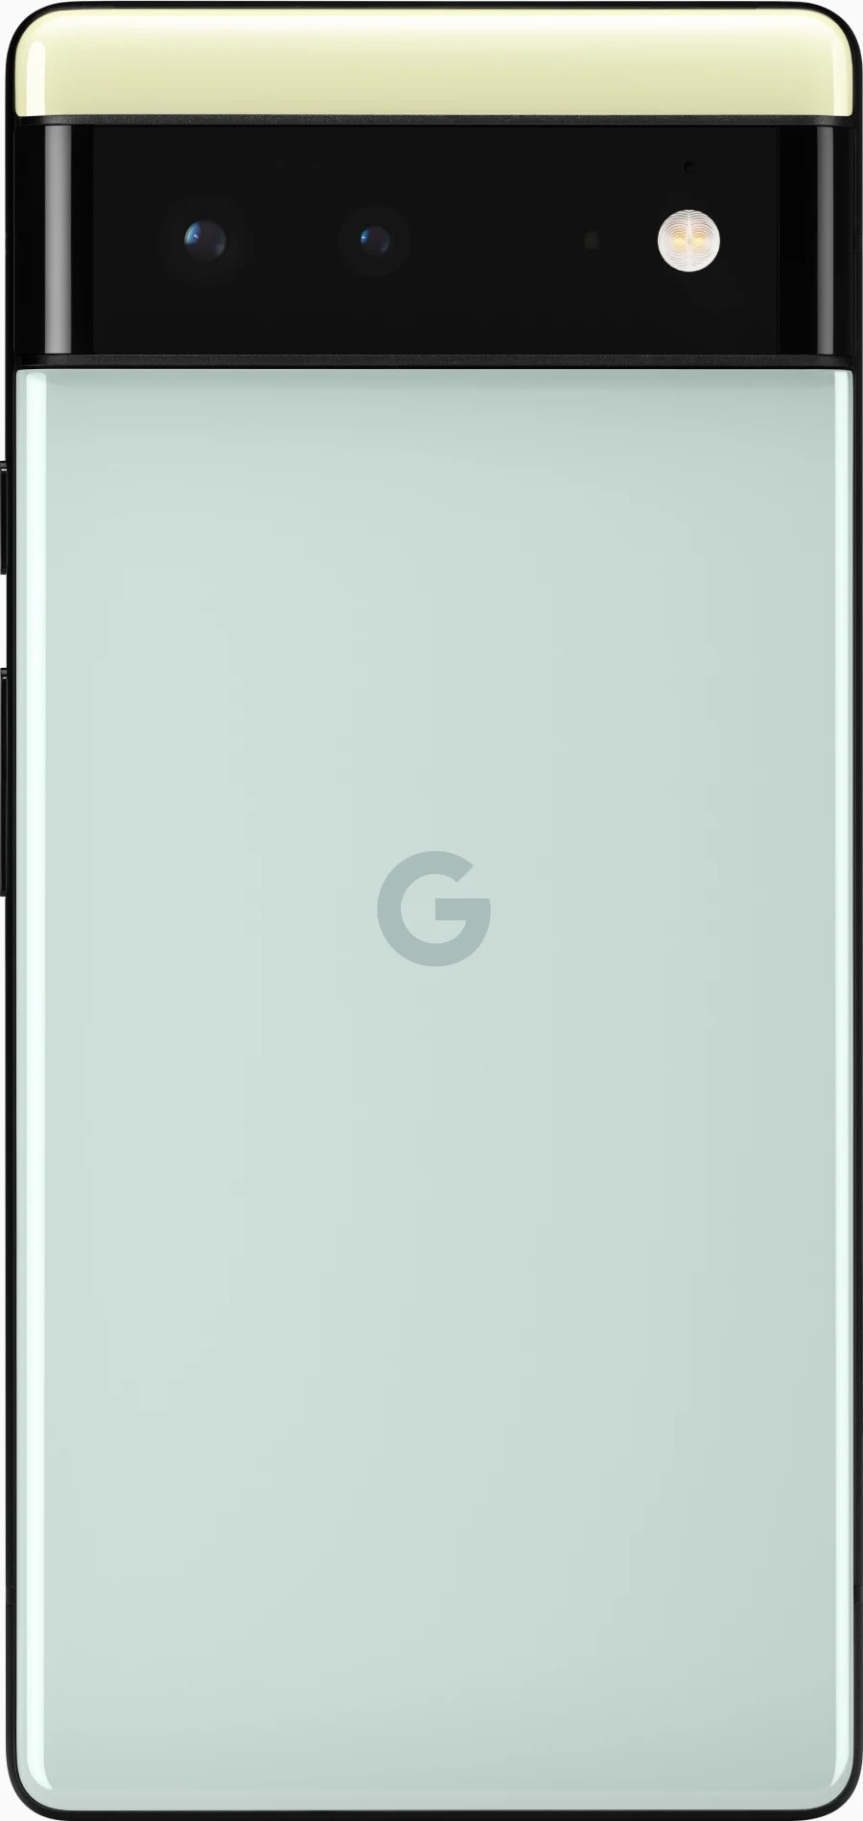 Some thoughts about the Google Pixel 6